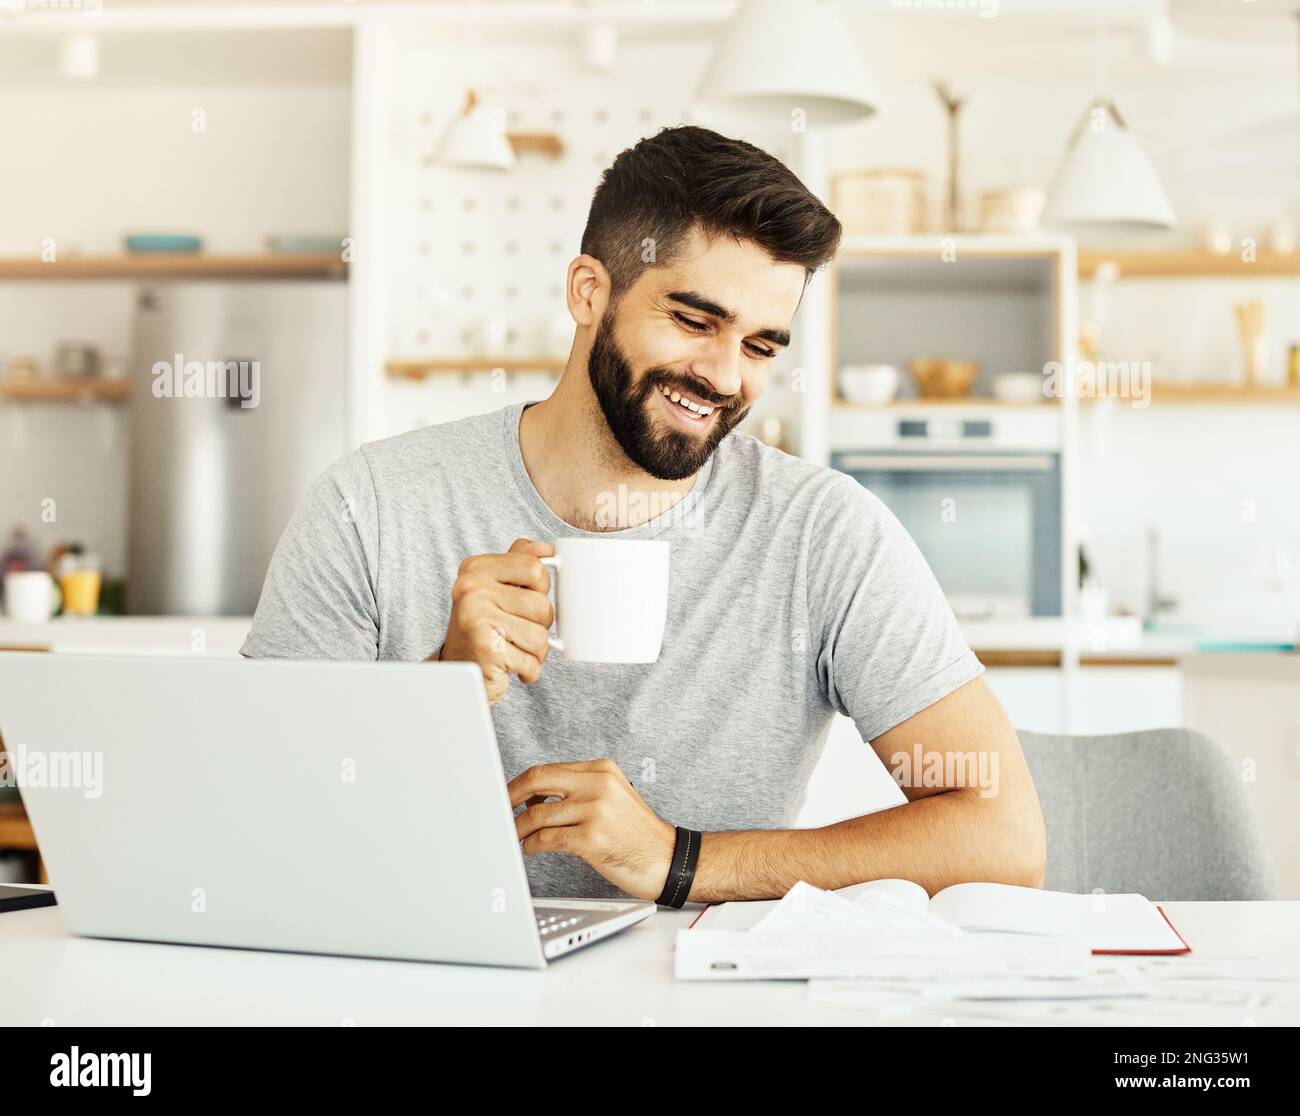 laptop man computer home technology young student business internet study document paperwork reading Stock Photo